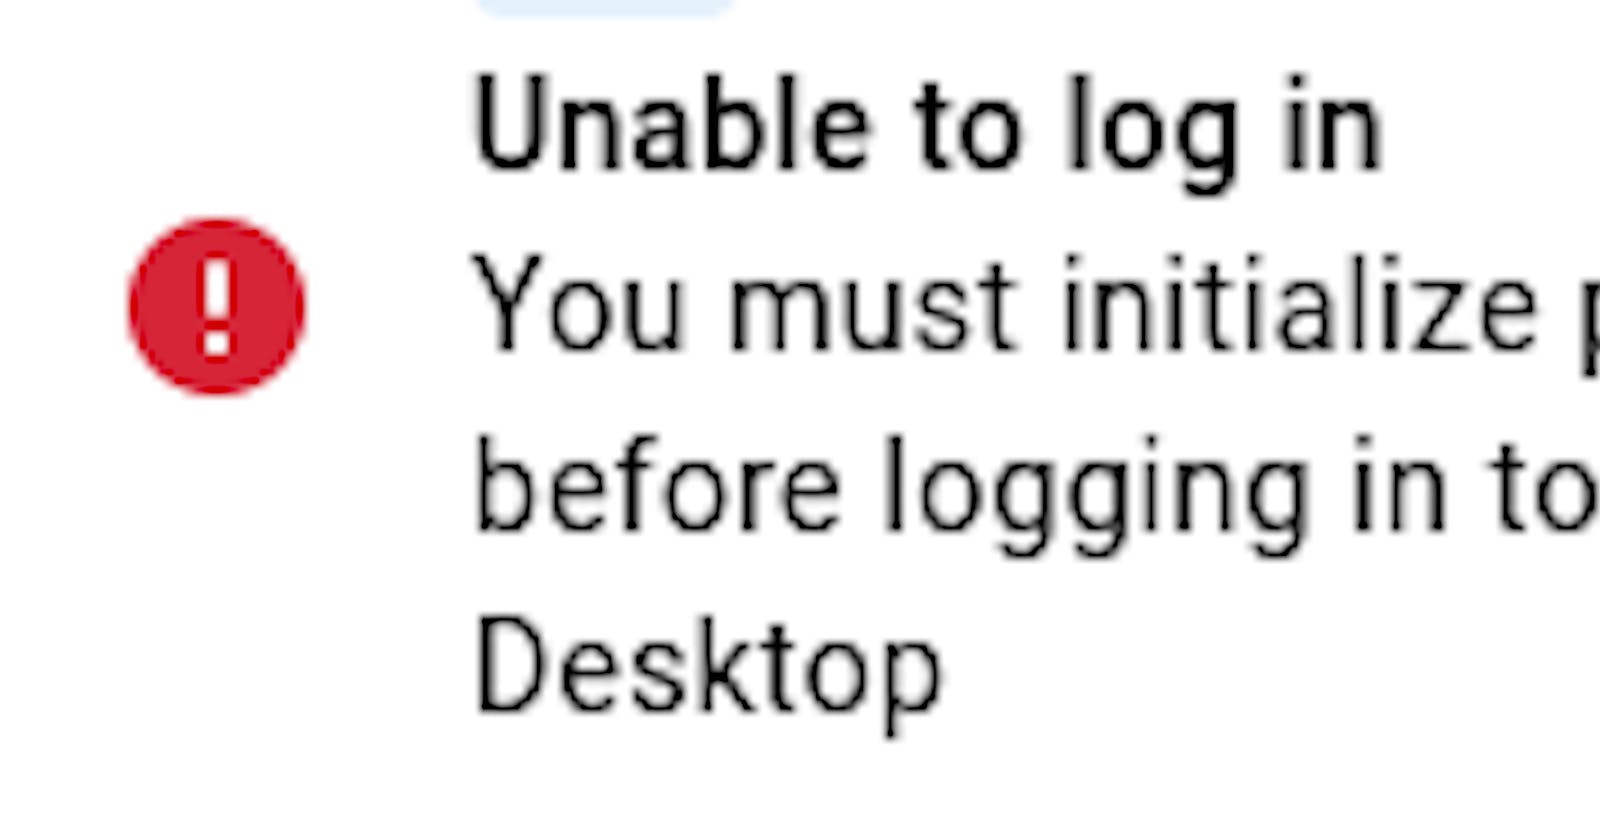 Resolving Docker  Desktop 'Unable to log in' warning on Fedora 38 due to Pass initialization